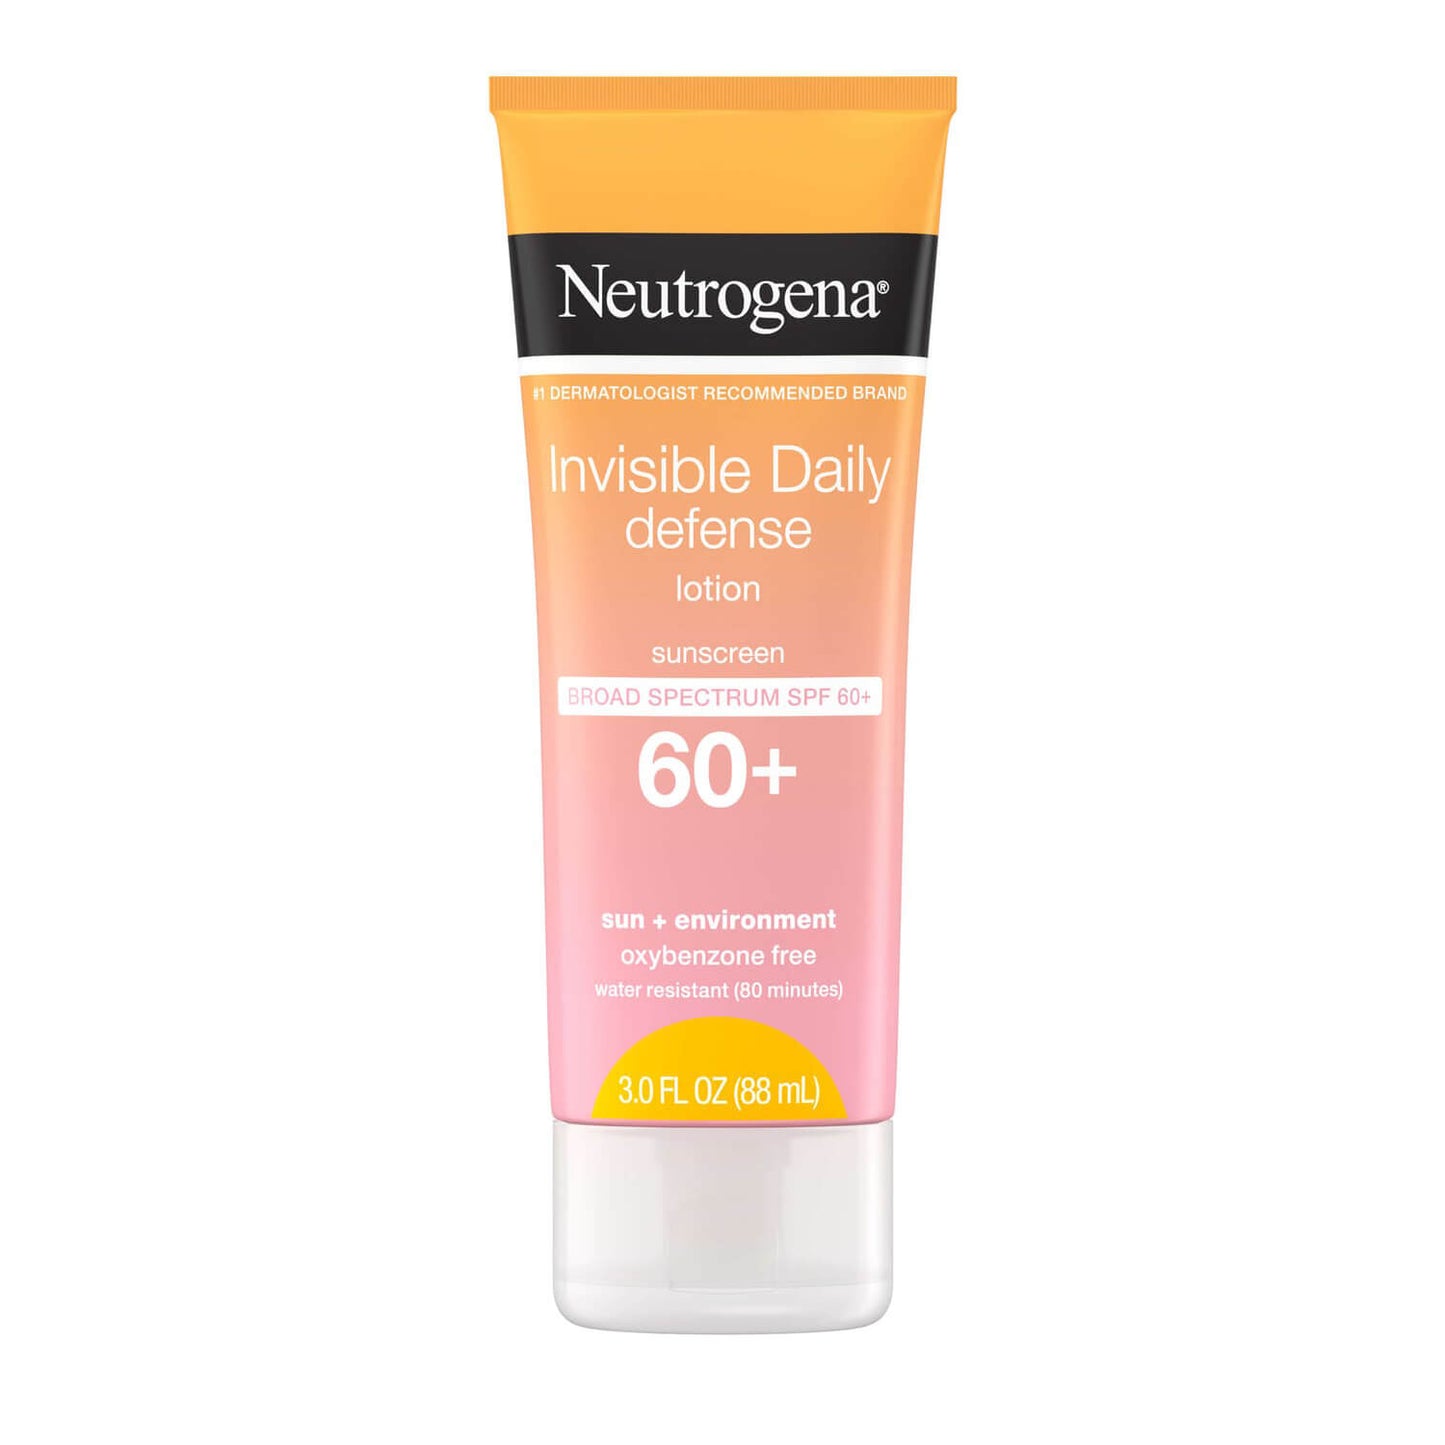 shop neutrogena Invisible Daily Defense Sunscreen Lotion SPF 60+ available at heygirl.pk for delivery in Pakistan